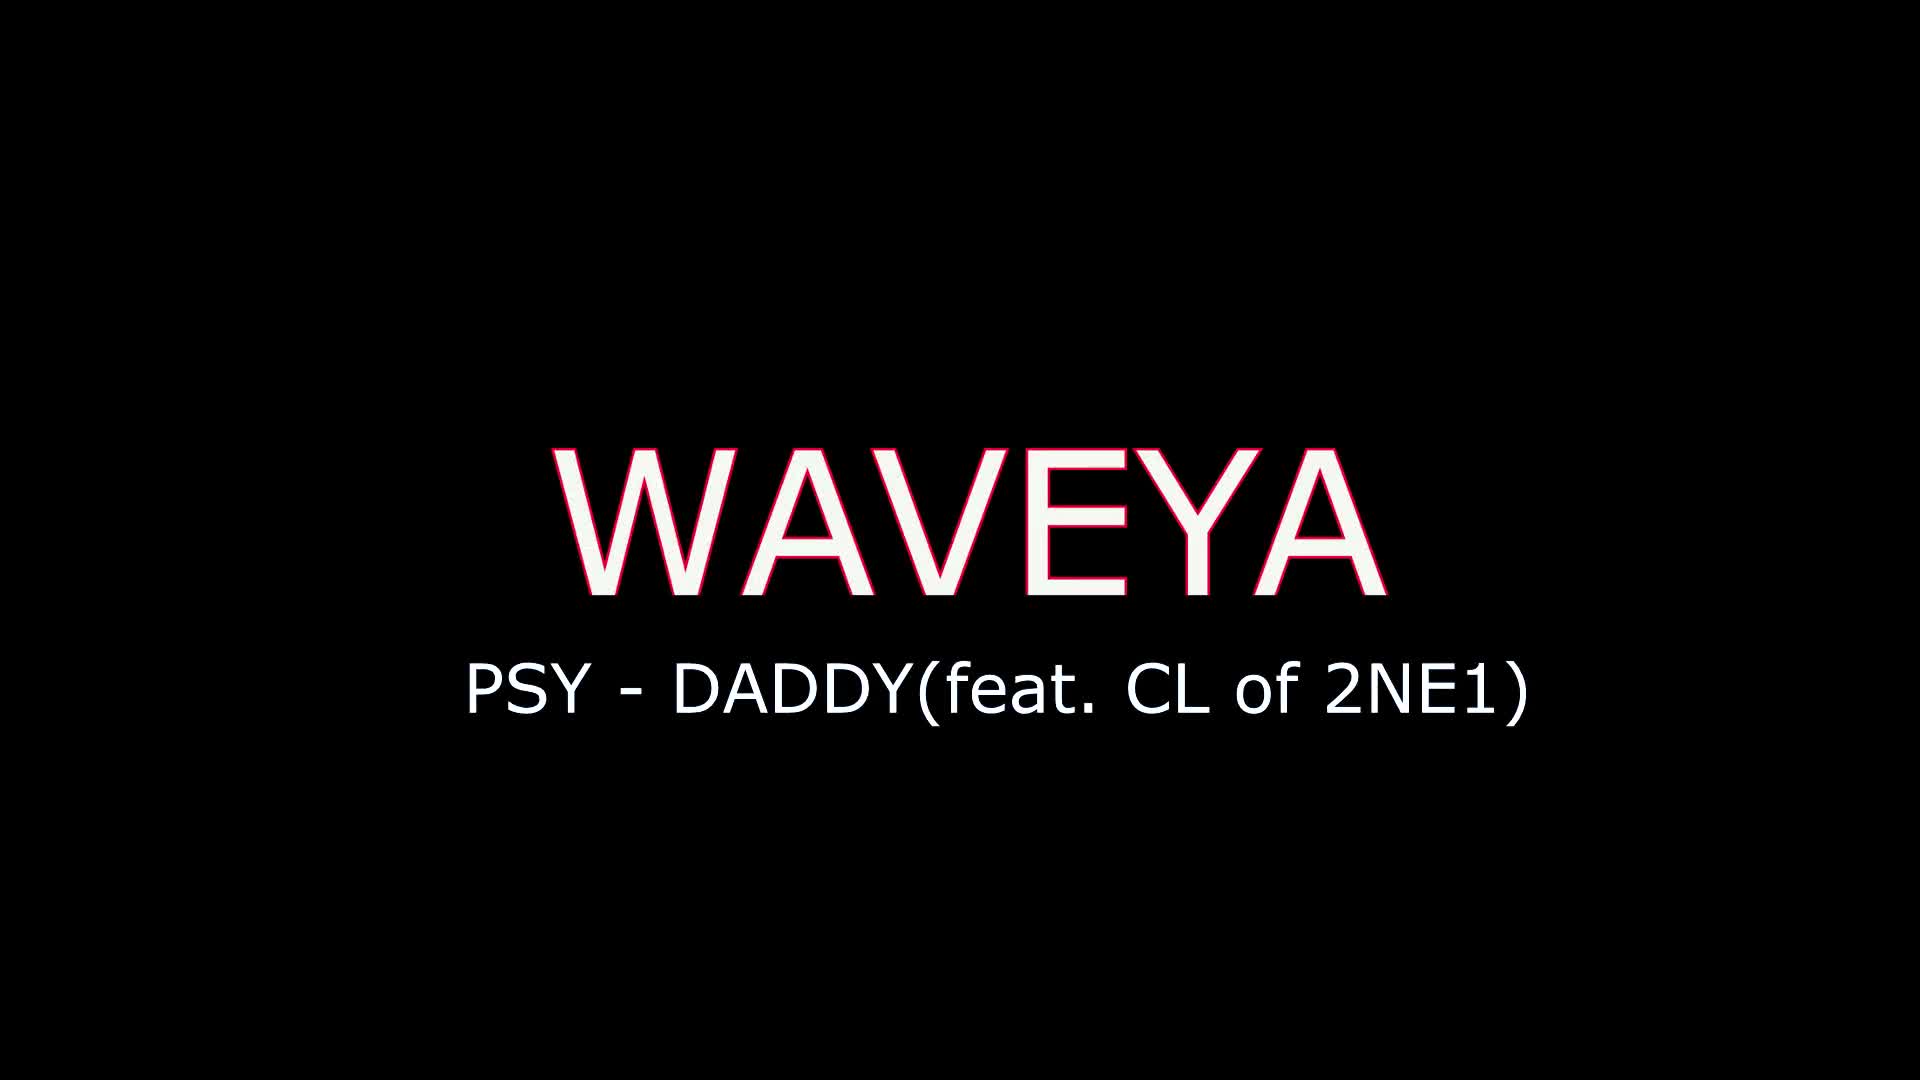 WAVEYA- PSY 싸이 DADDY 대디 (feat. CL of 2NE1) cover dance